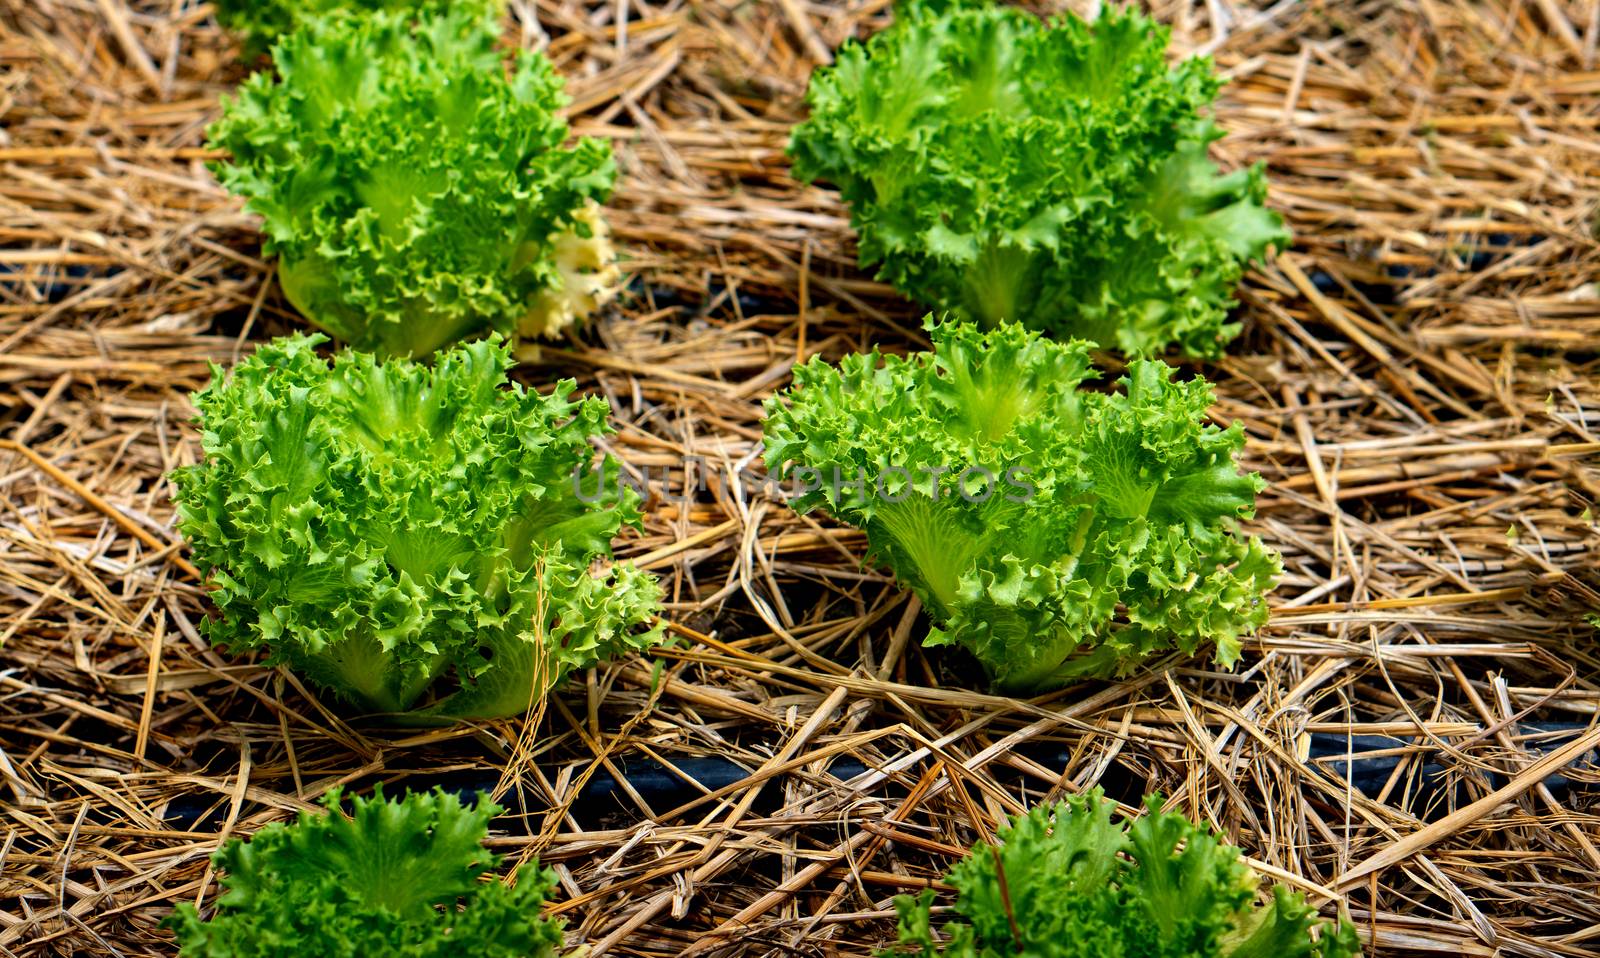 Summer green lettuce is grown in vegetable plots using straw covering to control the moisture of the top soil.